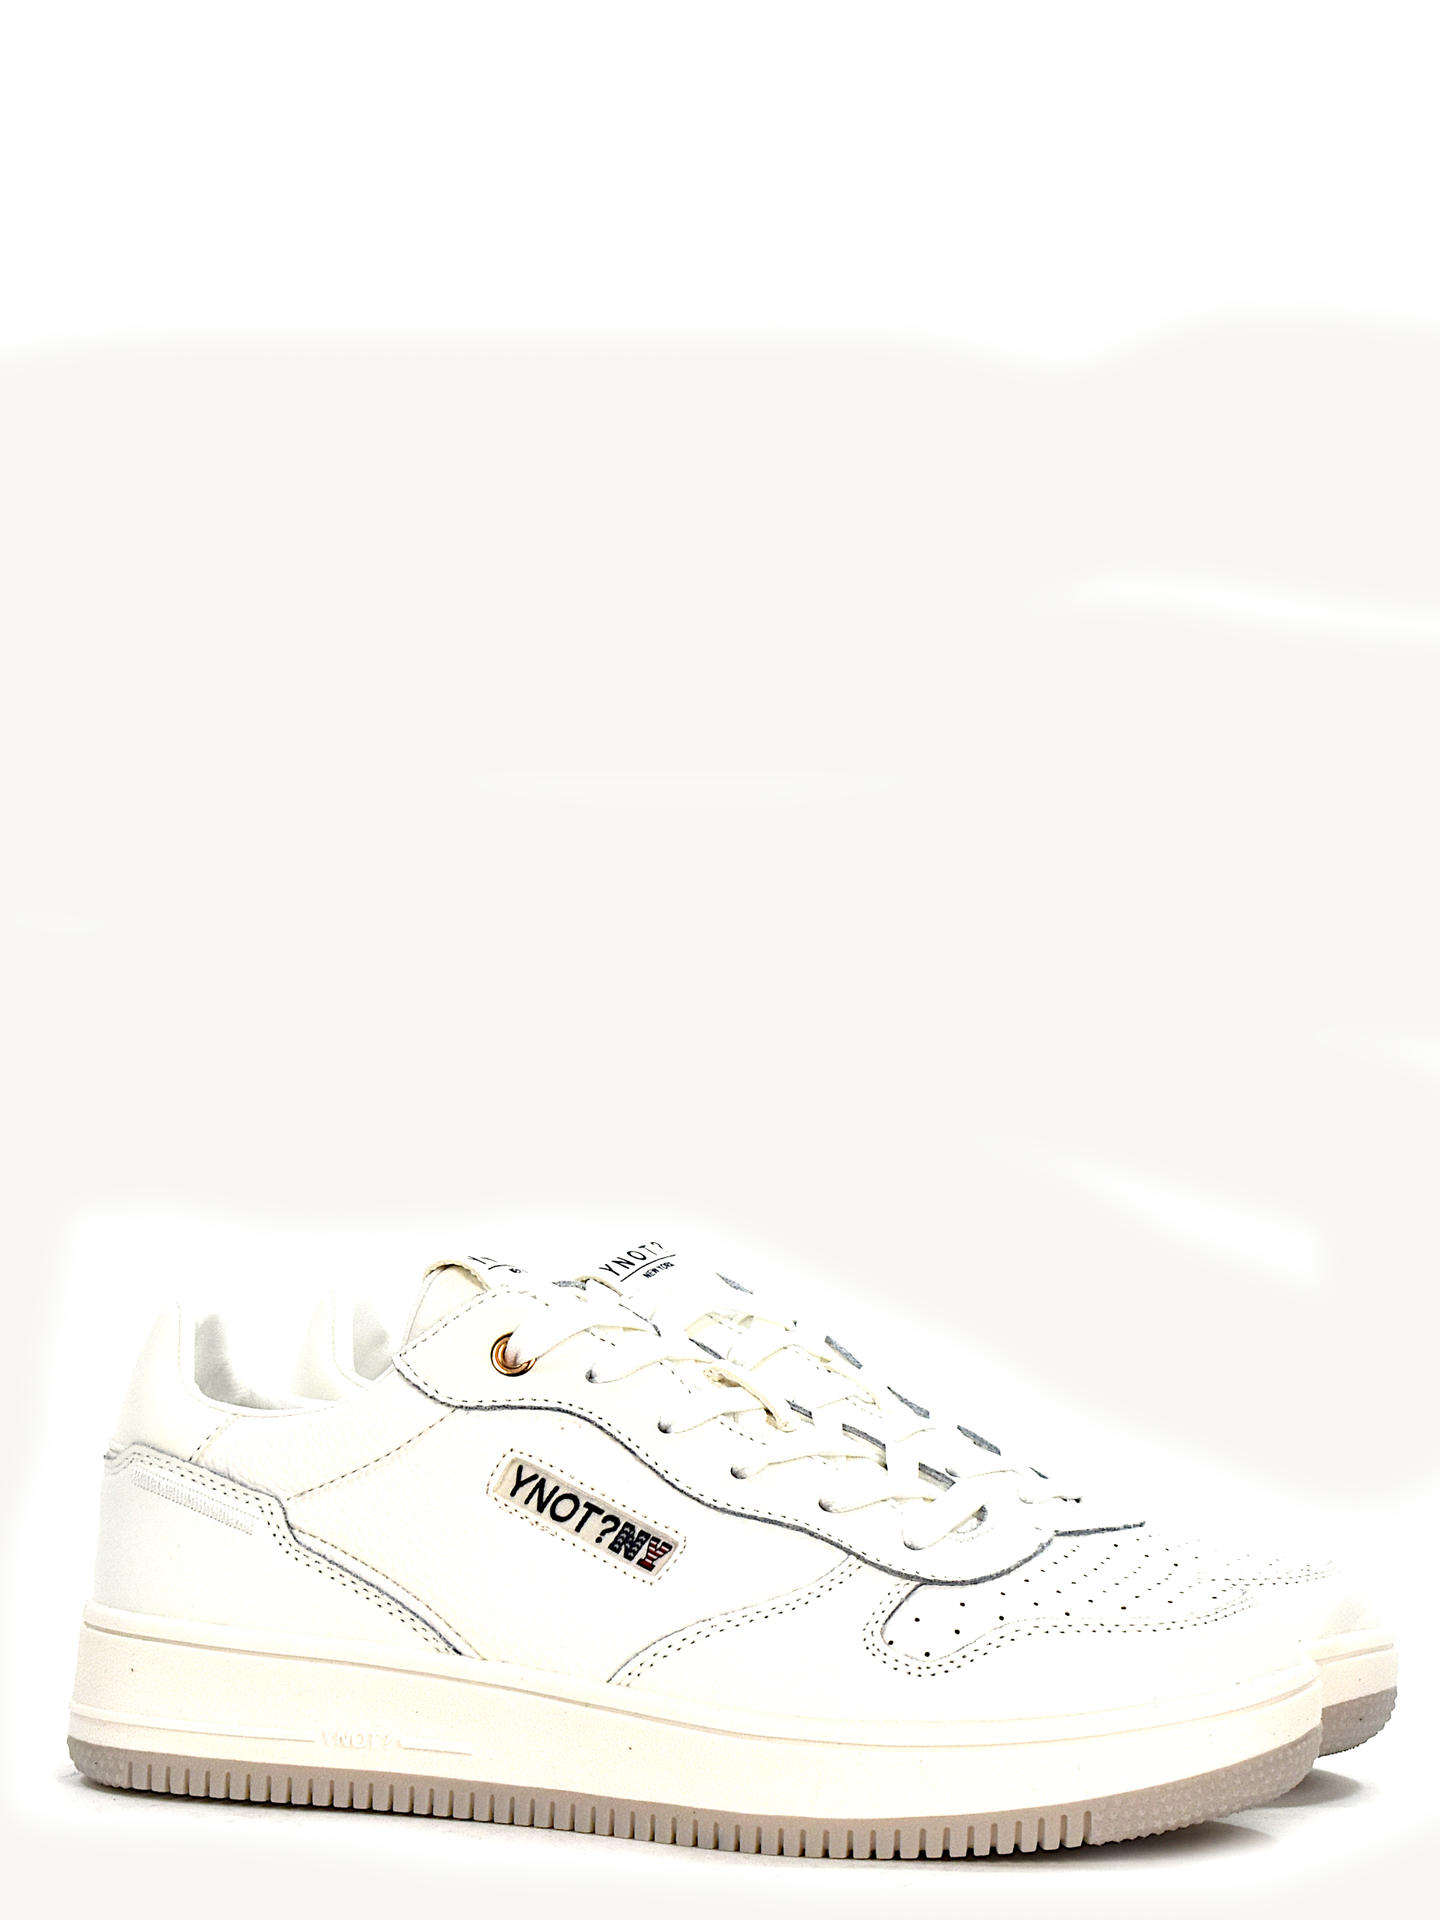 SNEAKERS YNOT?NY 3710Y BIANCO